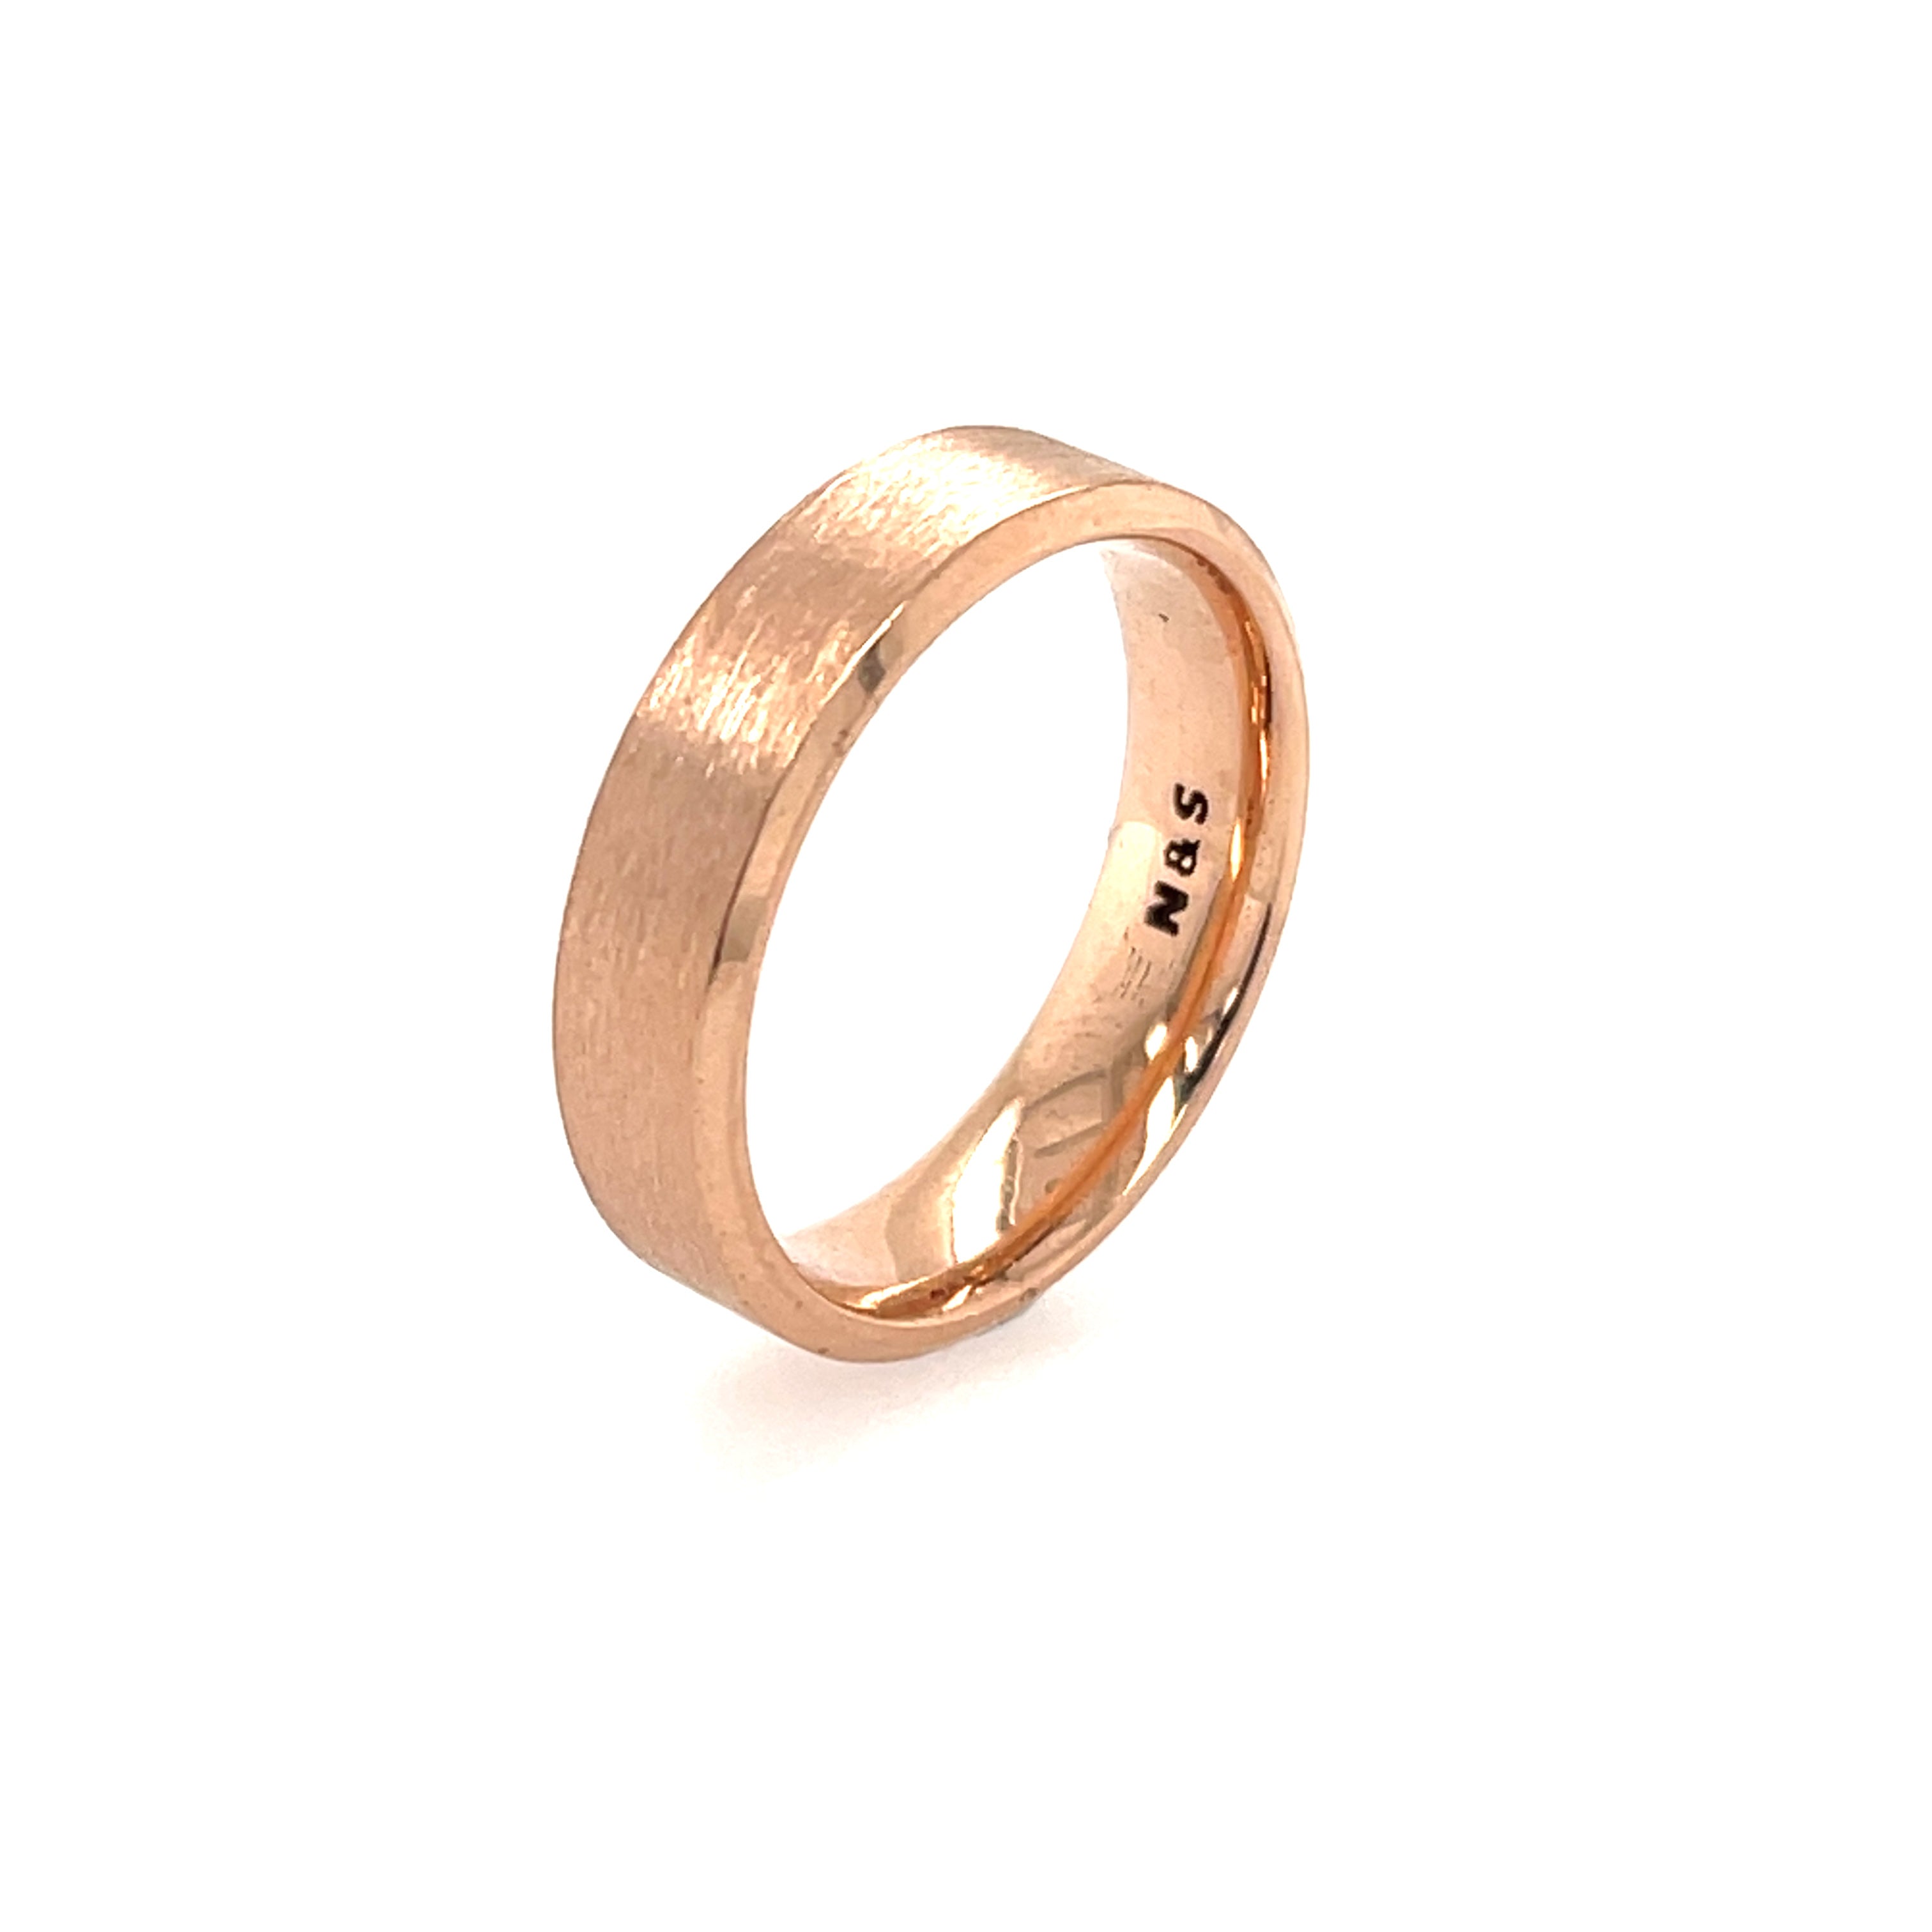 Mens Wedding Ring Solid Gold. Matte Gold Band. Mens Gold Ring. Male Wedding  Band. Ring for Him. Wedding Band for Him. Men's Gold Ring Band. - Etsy |  Mens wedding rings gold,